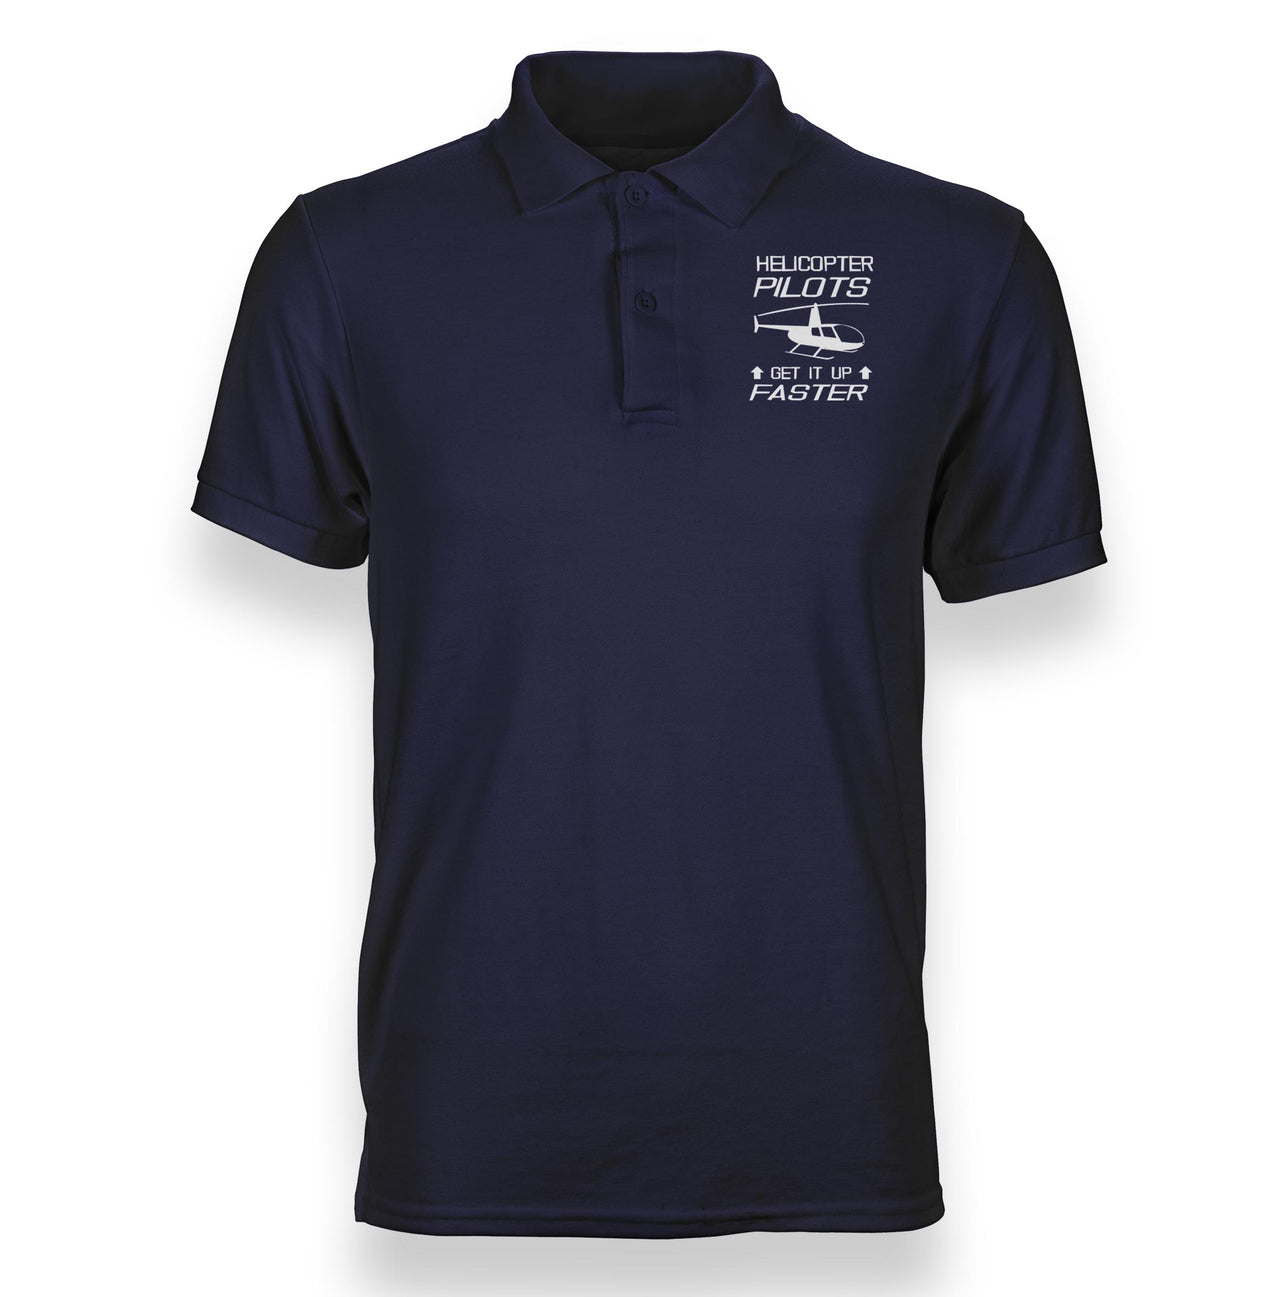 Helicopter Pilots Get It Up Faster Designed Polo T-Shirts